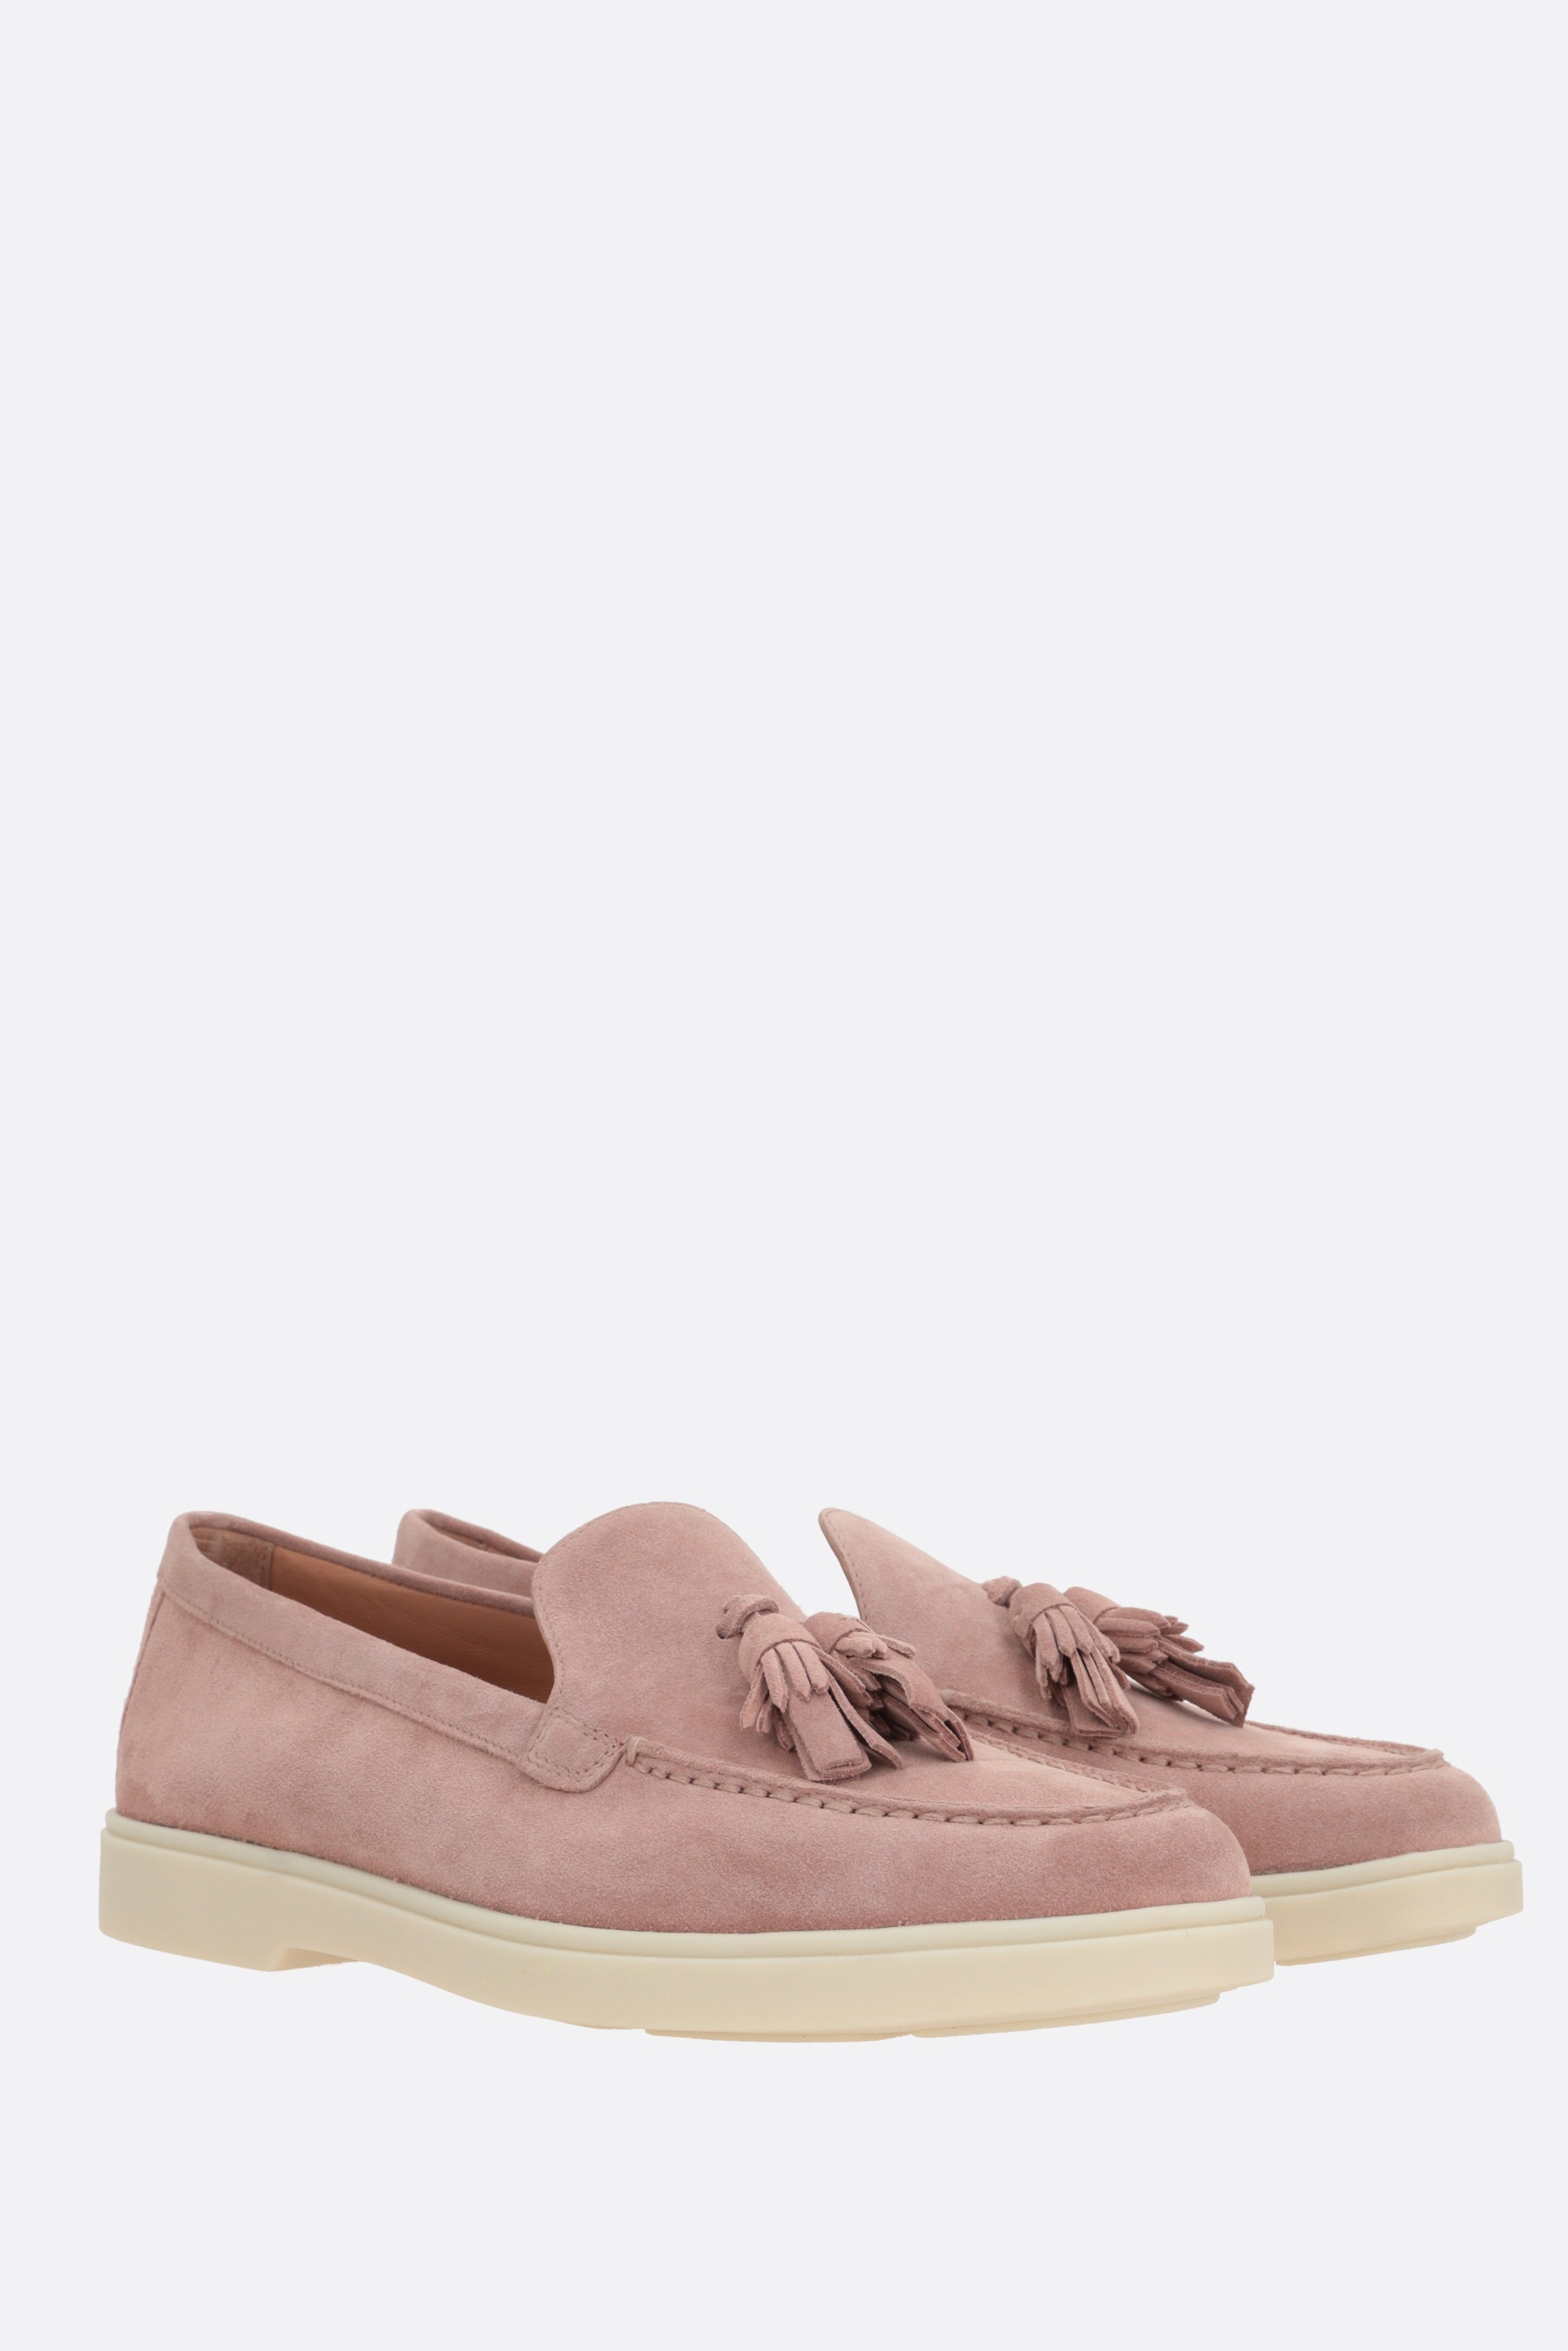 SUEDE LOAFERS WITH TASSELS - 2